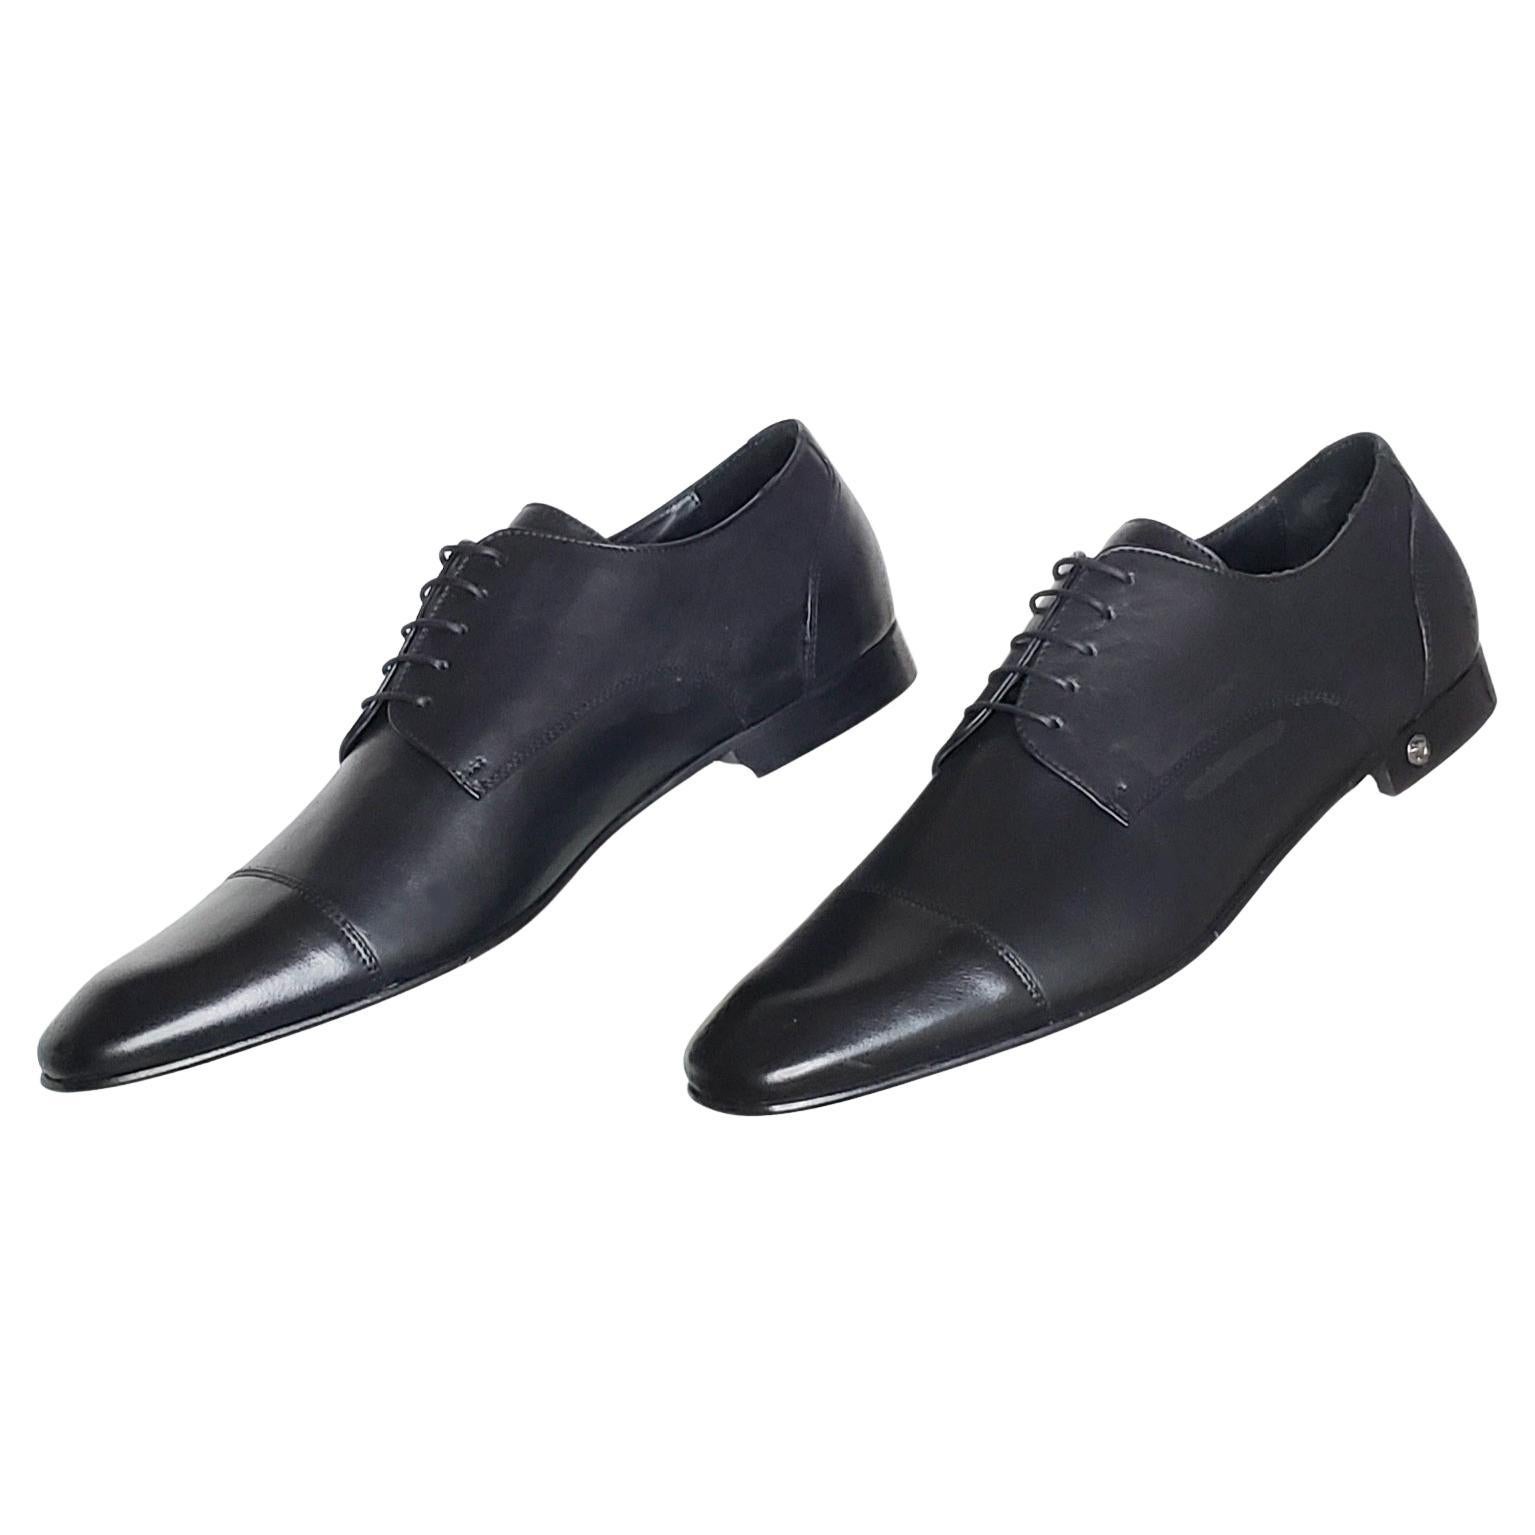 NEW VERSACE BLACK LEATHER LOAFER Shoes 44 - 11 For Sale